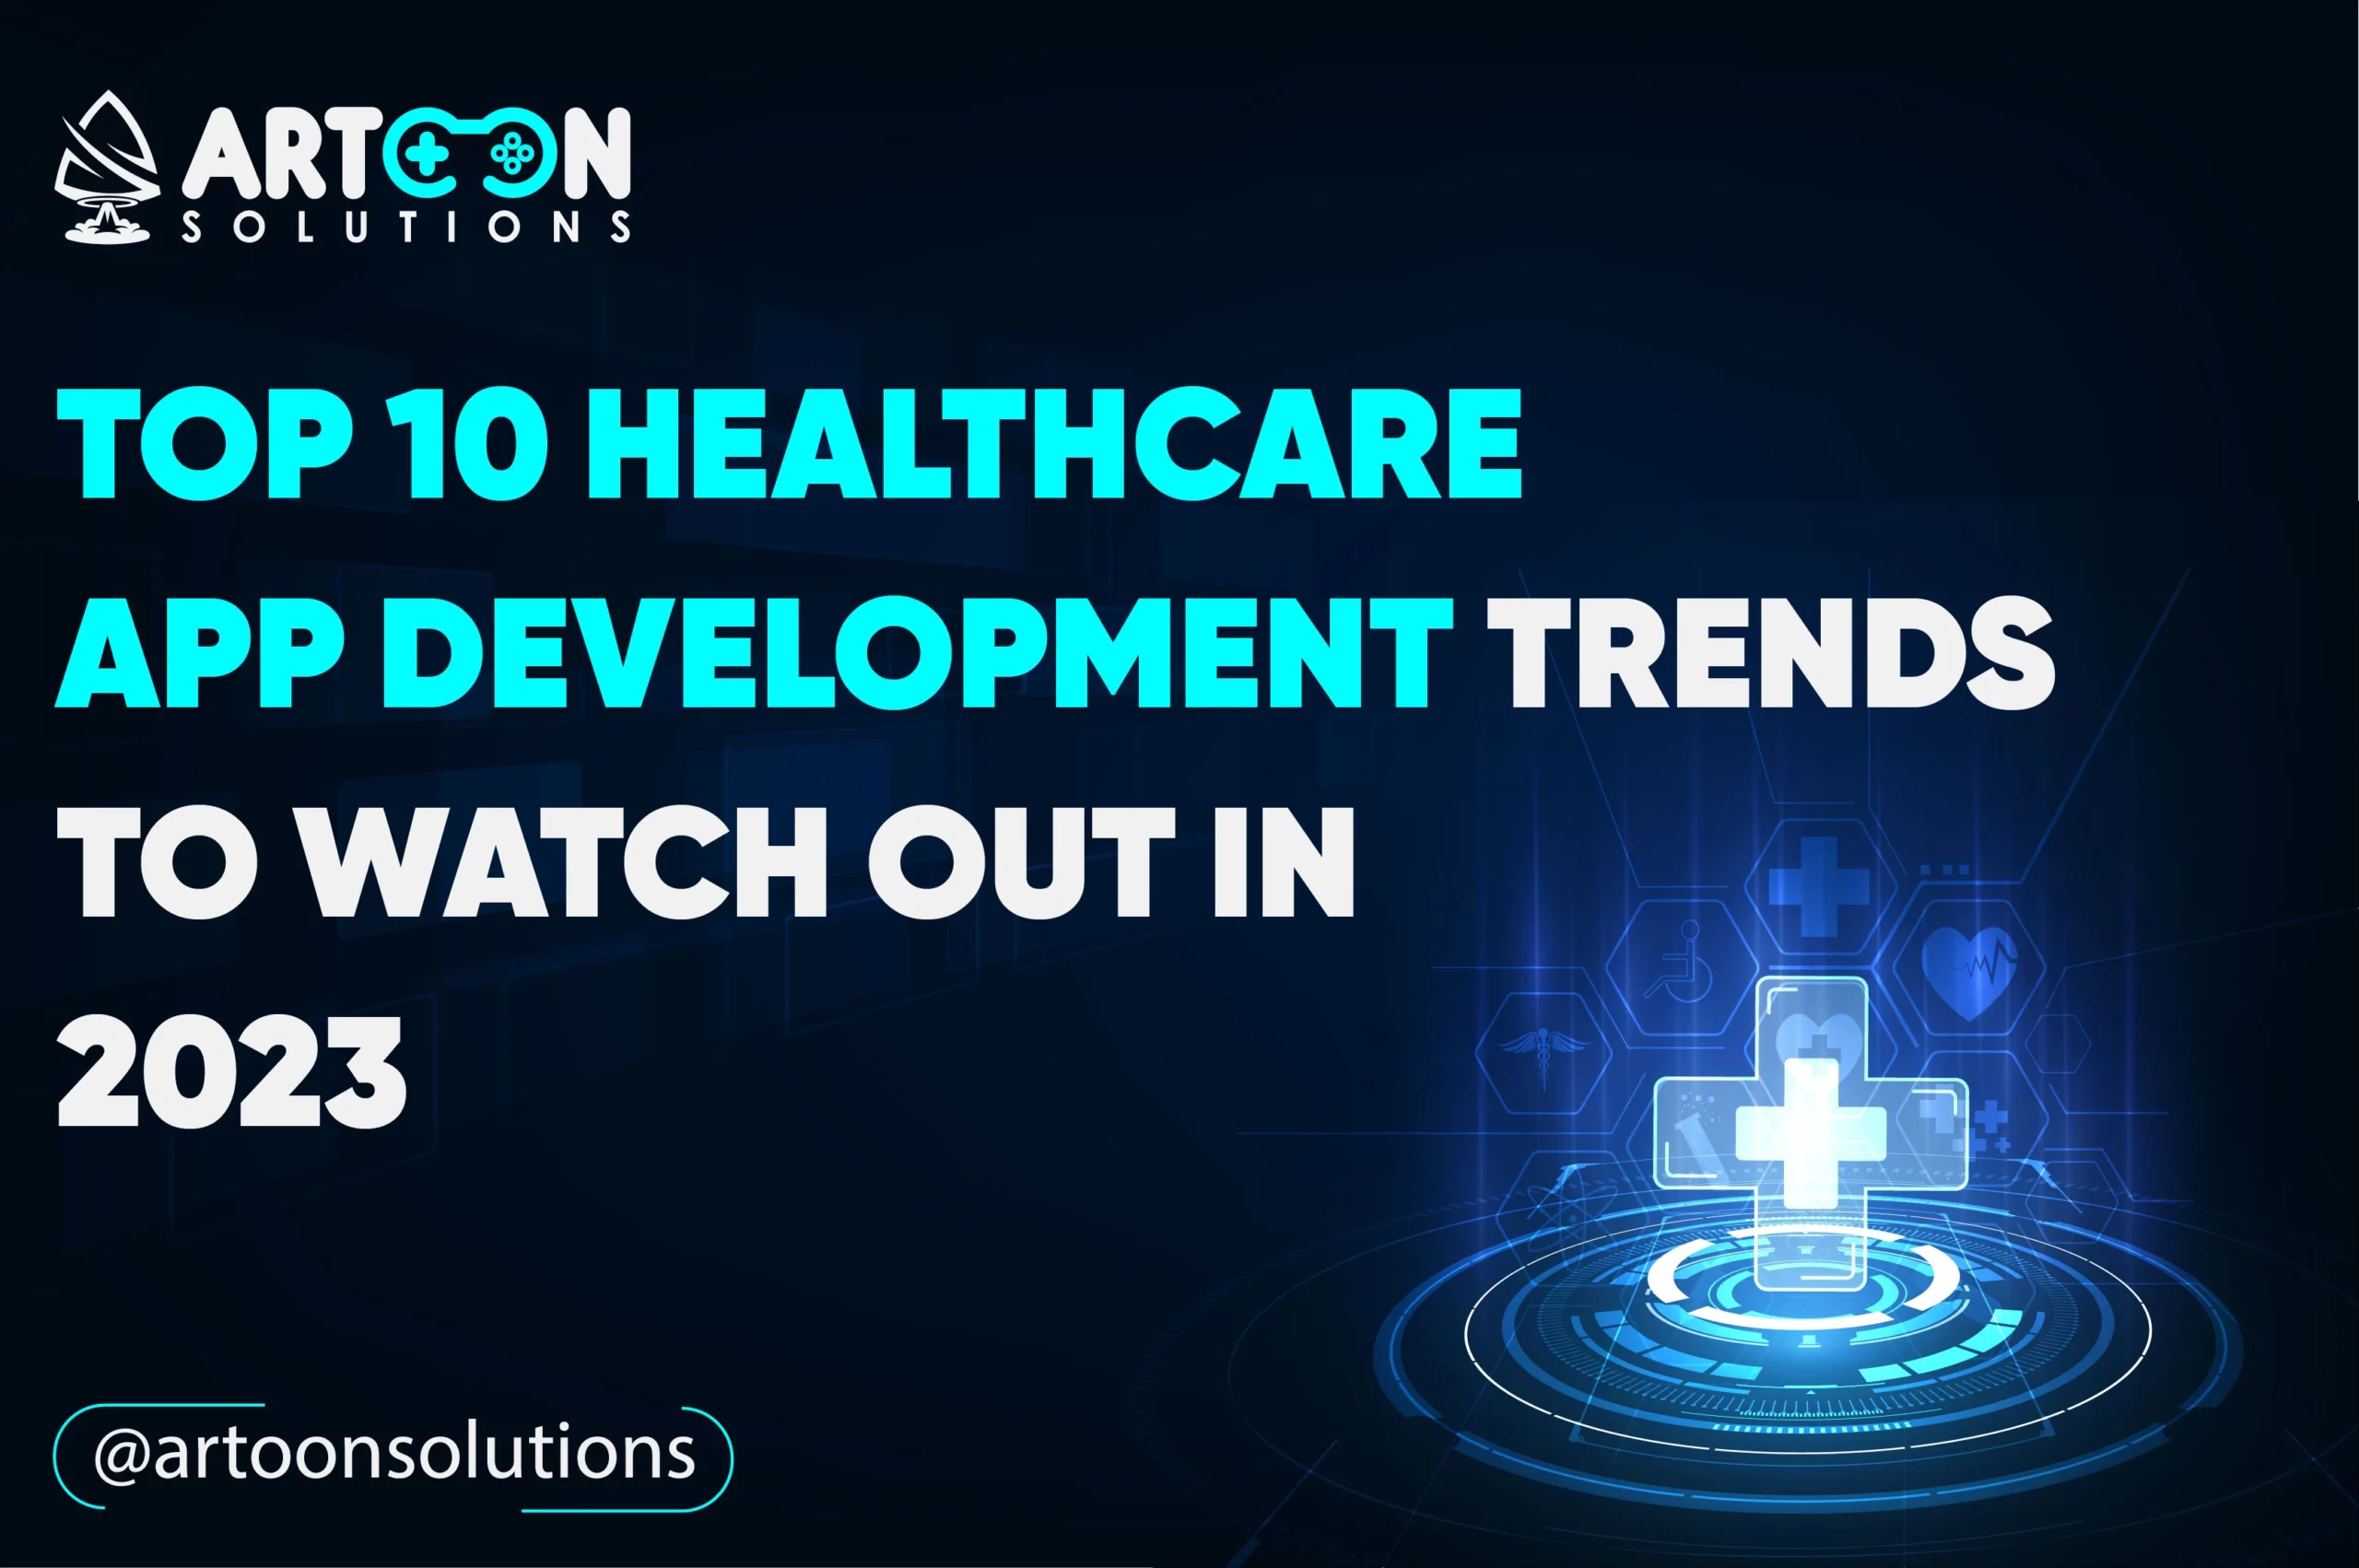 Top 10 Healthcare App Development Trends To Watch Out in 2023